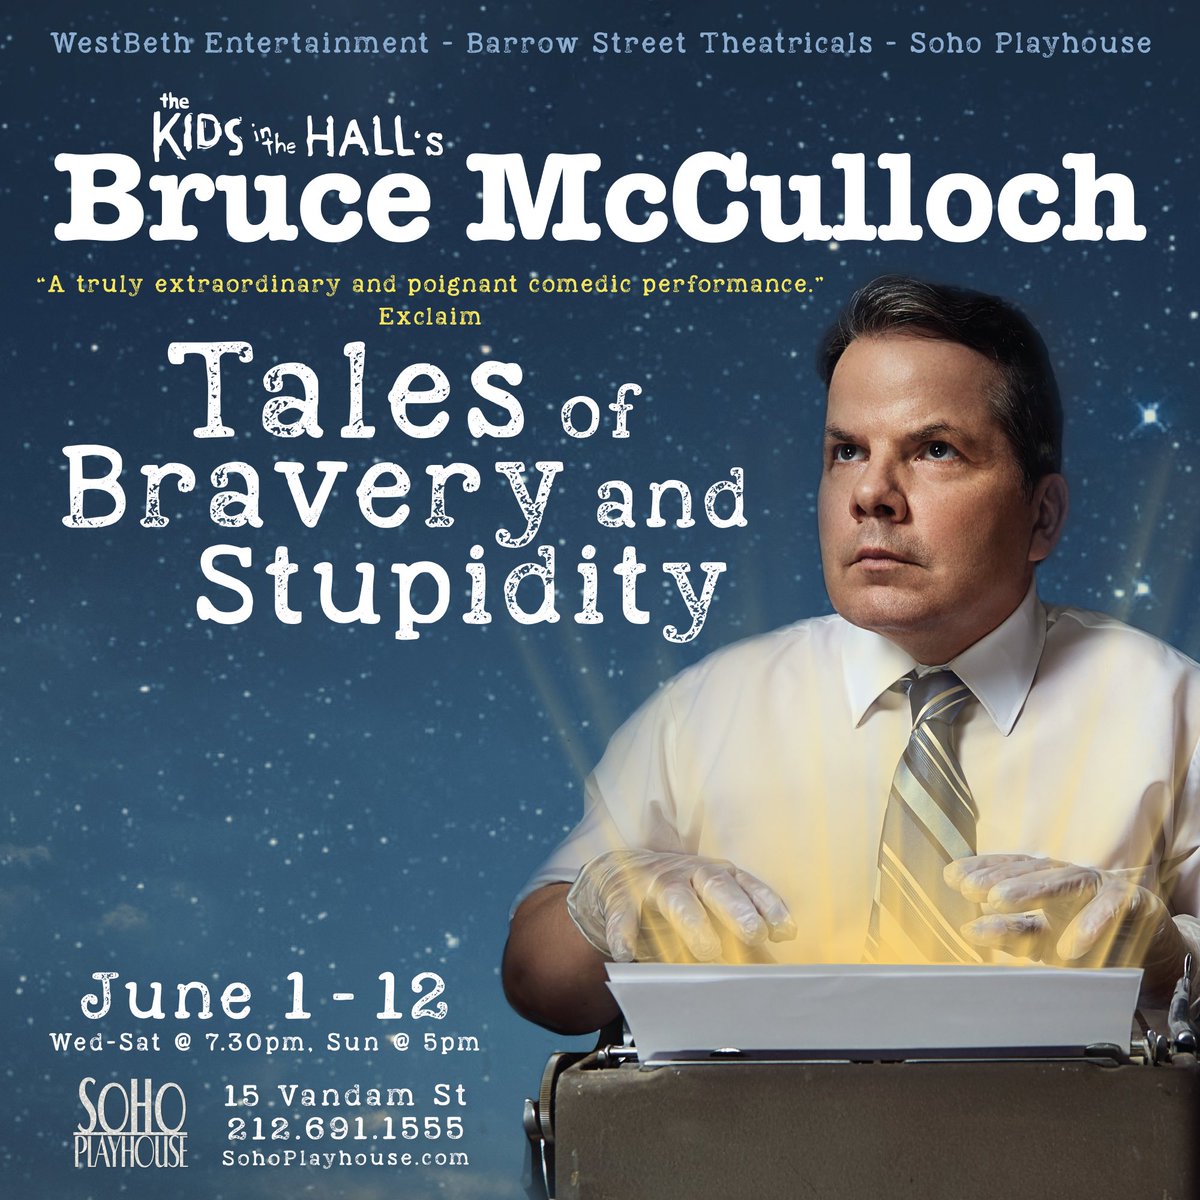 Did you hear? Bruce McCulloch is coming to SoHo Playhouse this June! This show is so fun and you won’t want to miss it! Visit our website for tickets and information!